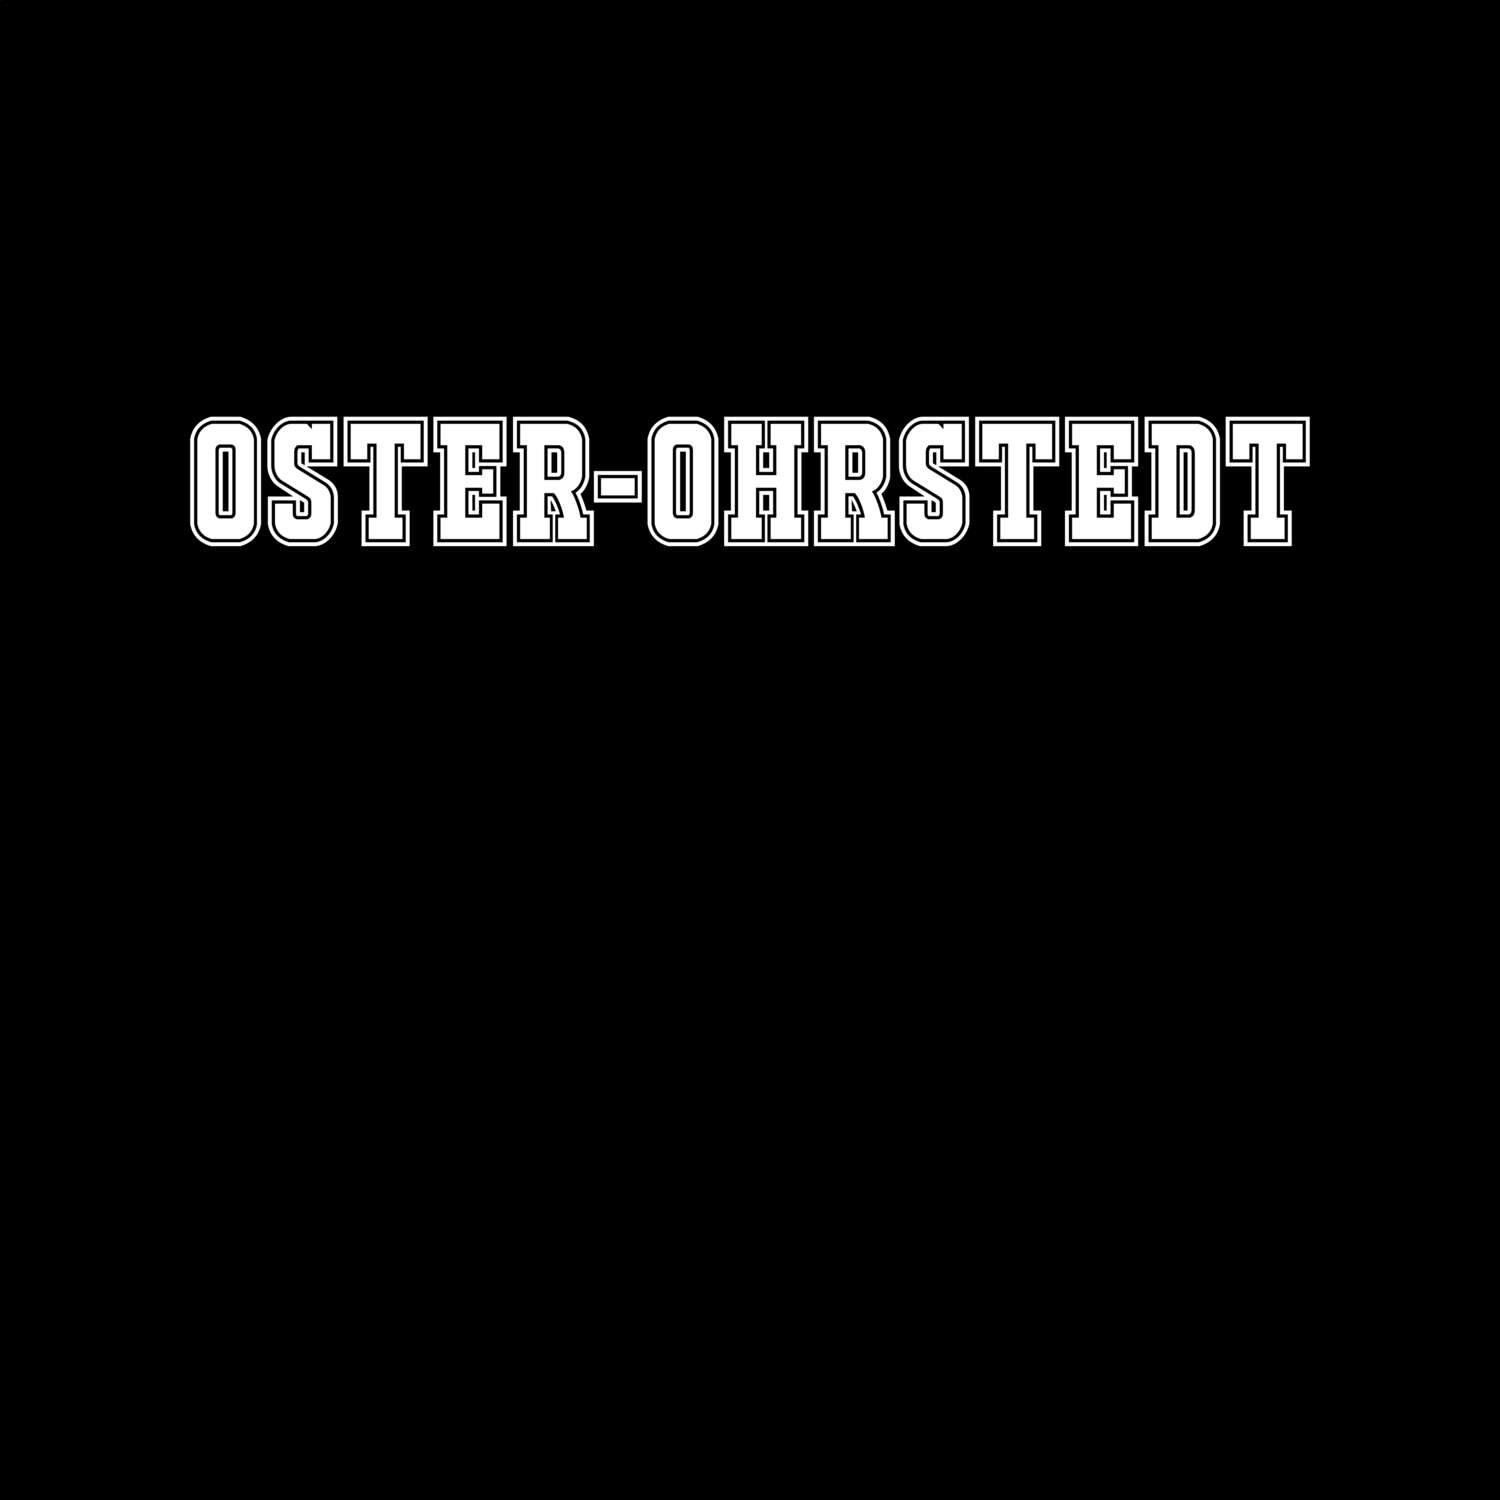 Oster-Ohrstedt T-Shirt »Classic«